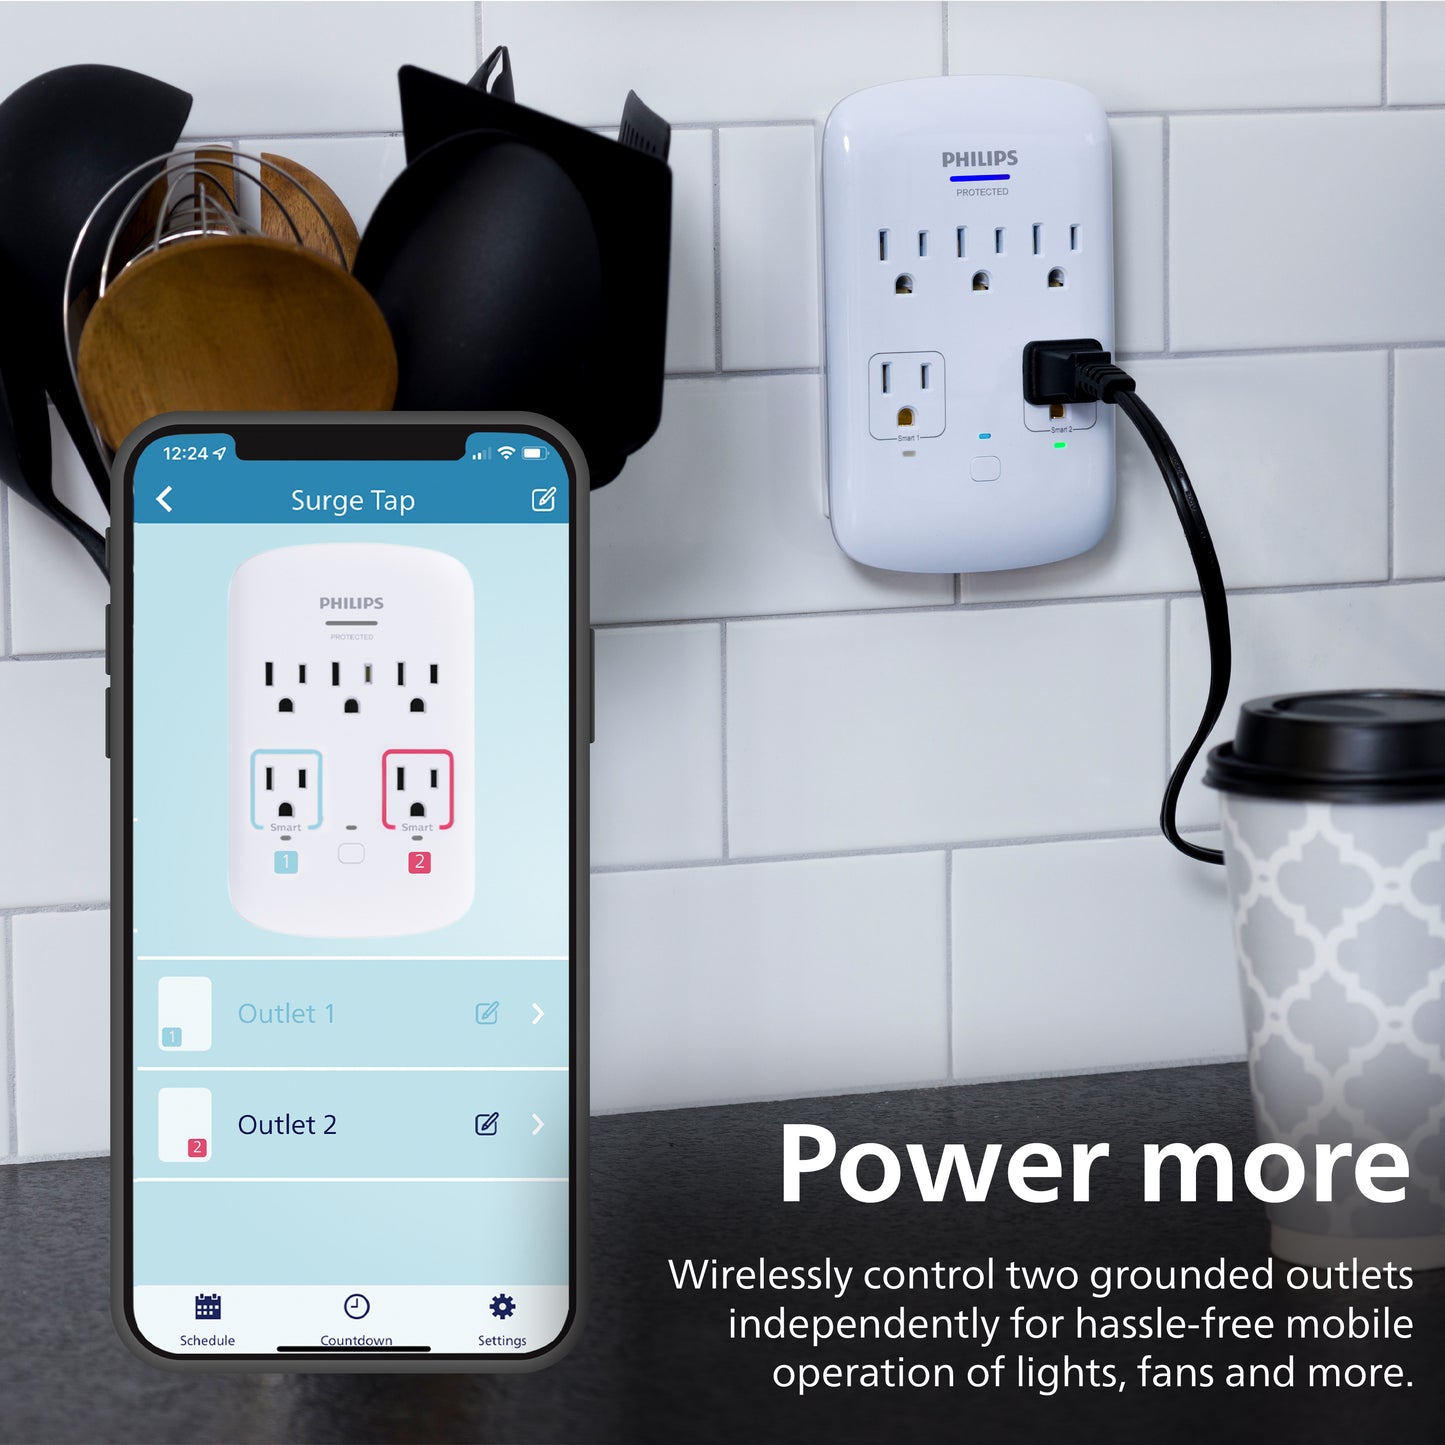 Philips Smart Plug 5-Outlet Surge Protector, 490J, White